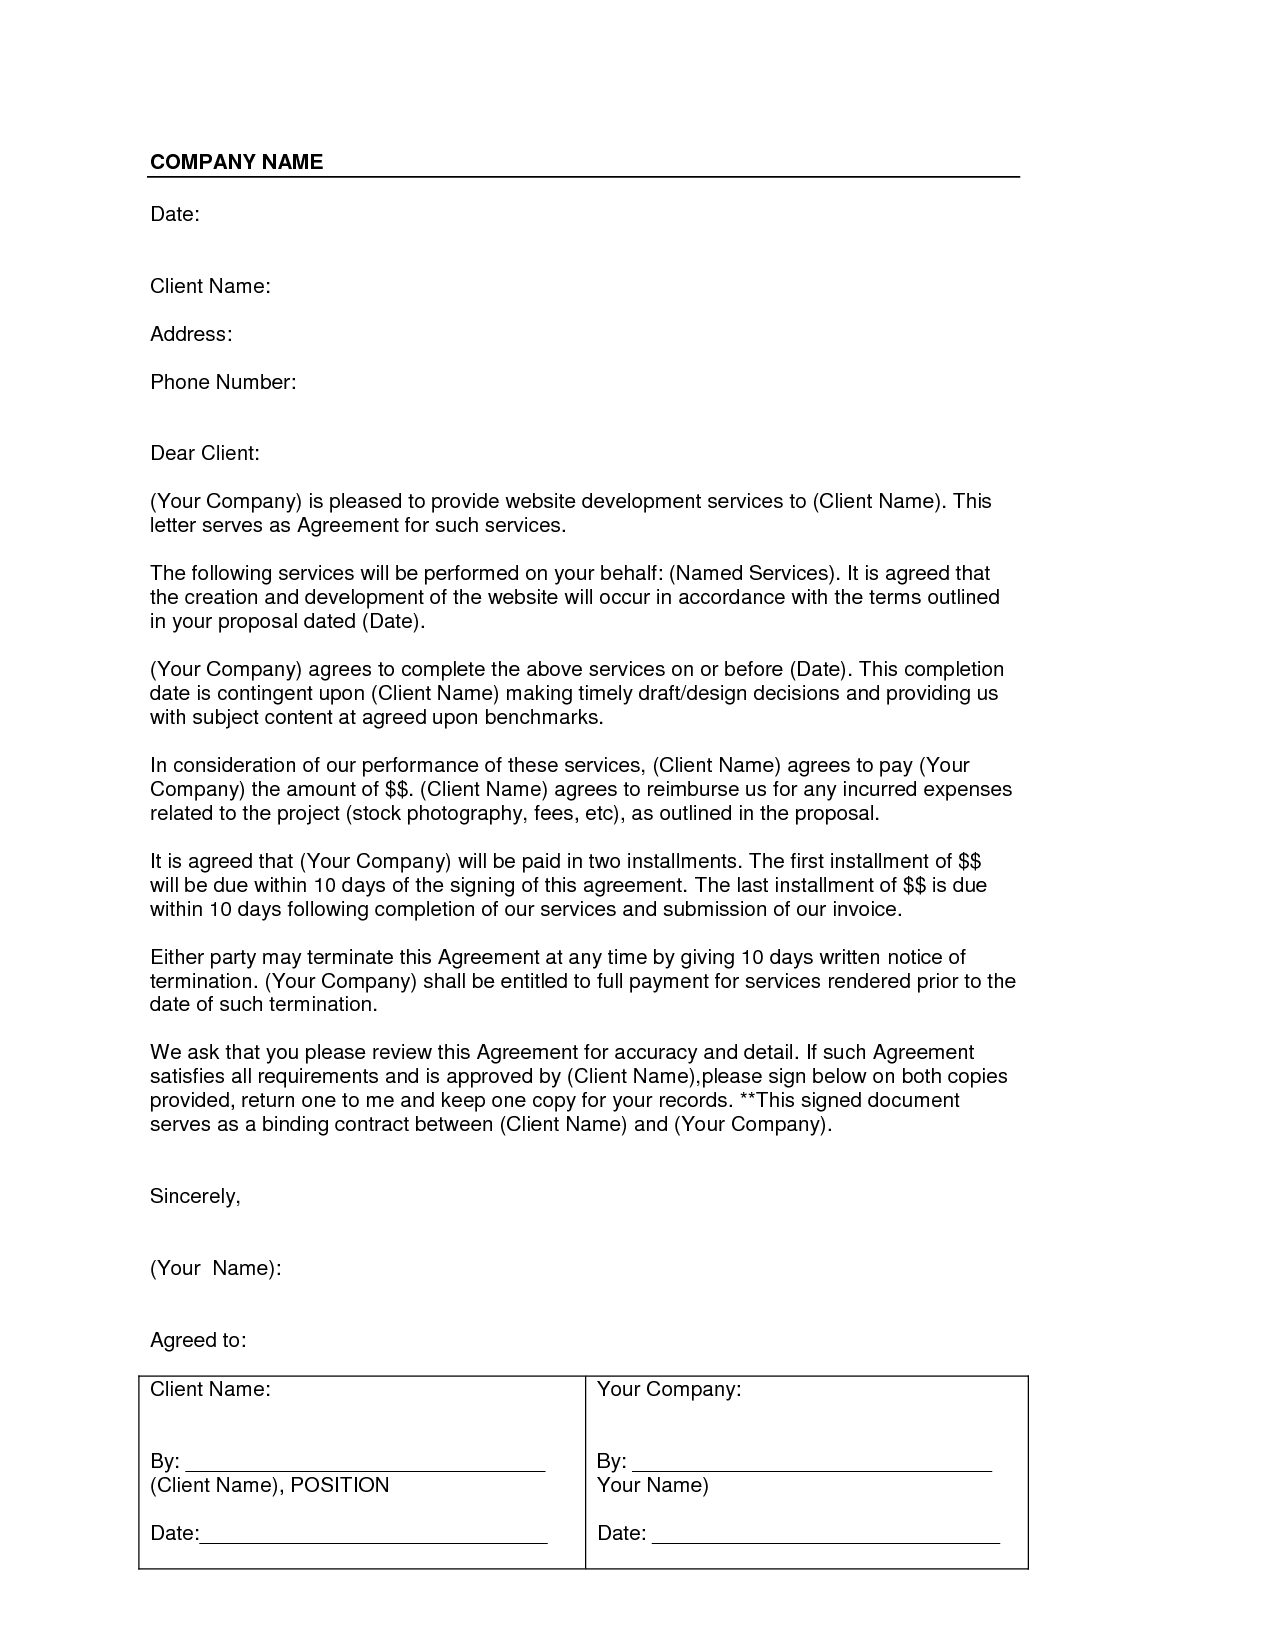 Letter Of Agreement Free Printable Documents